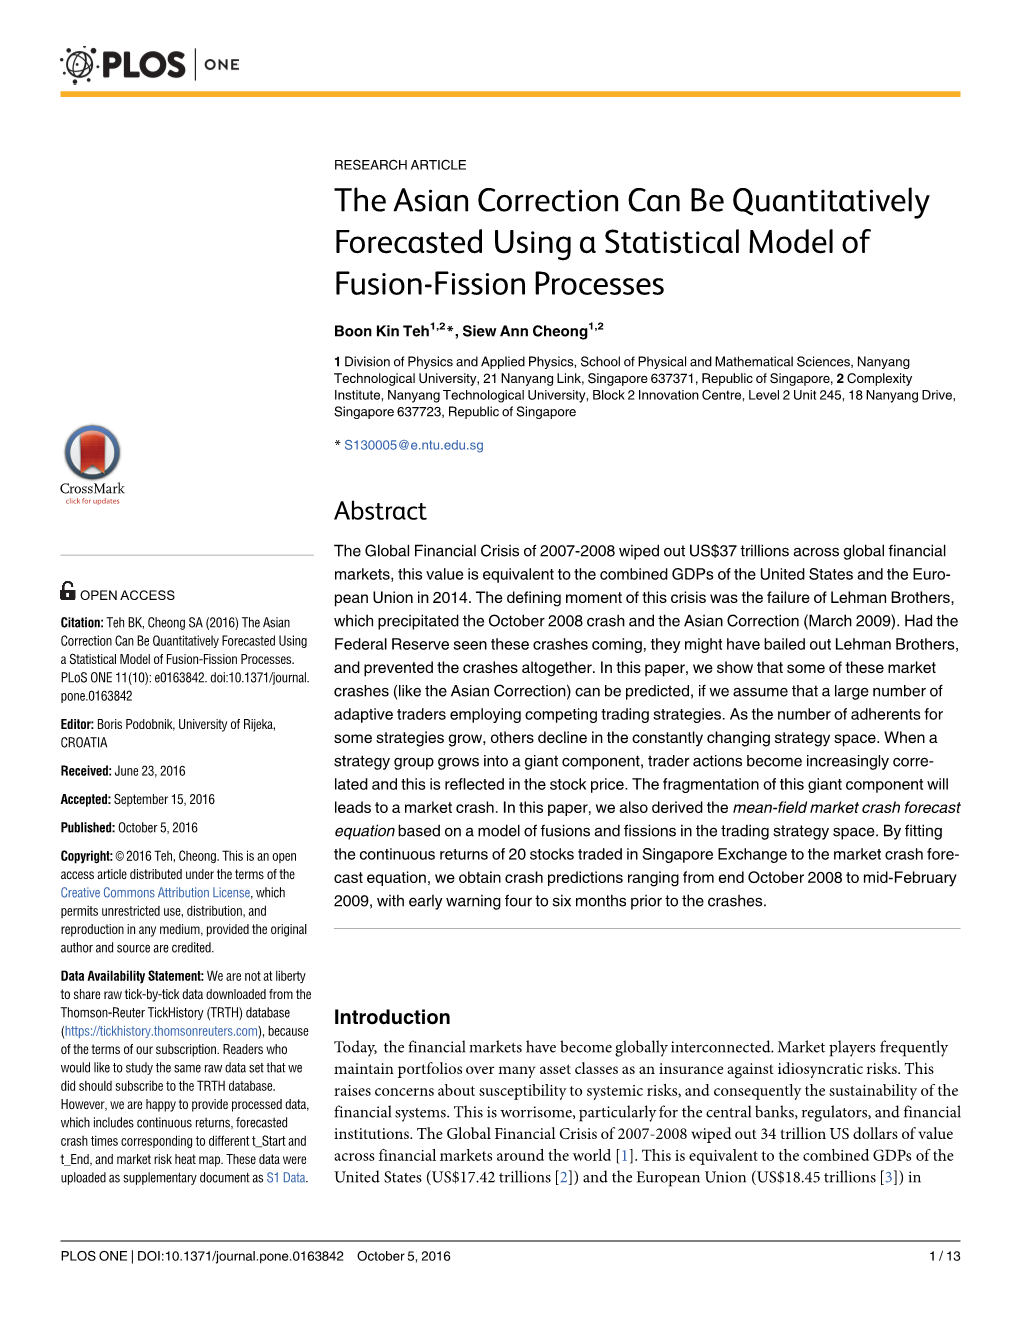 The Asian Correction Can Be Quantitatively Forecasted Using a Statistical Model of Fusion-Fission Processes